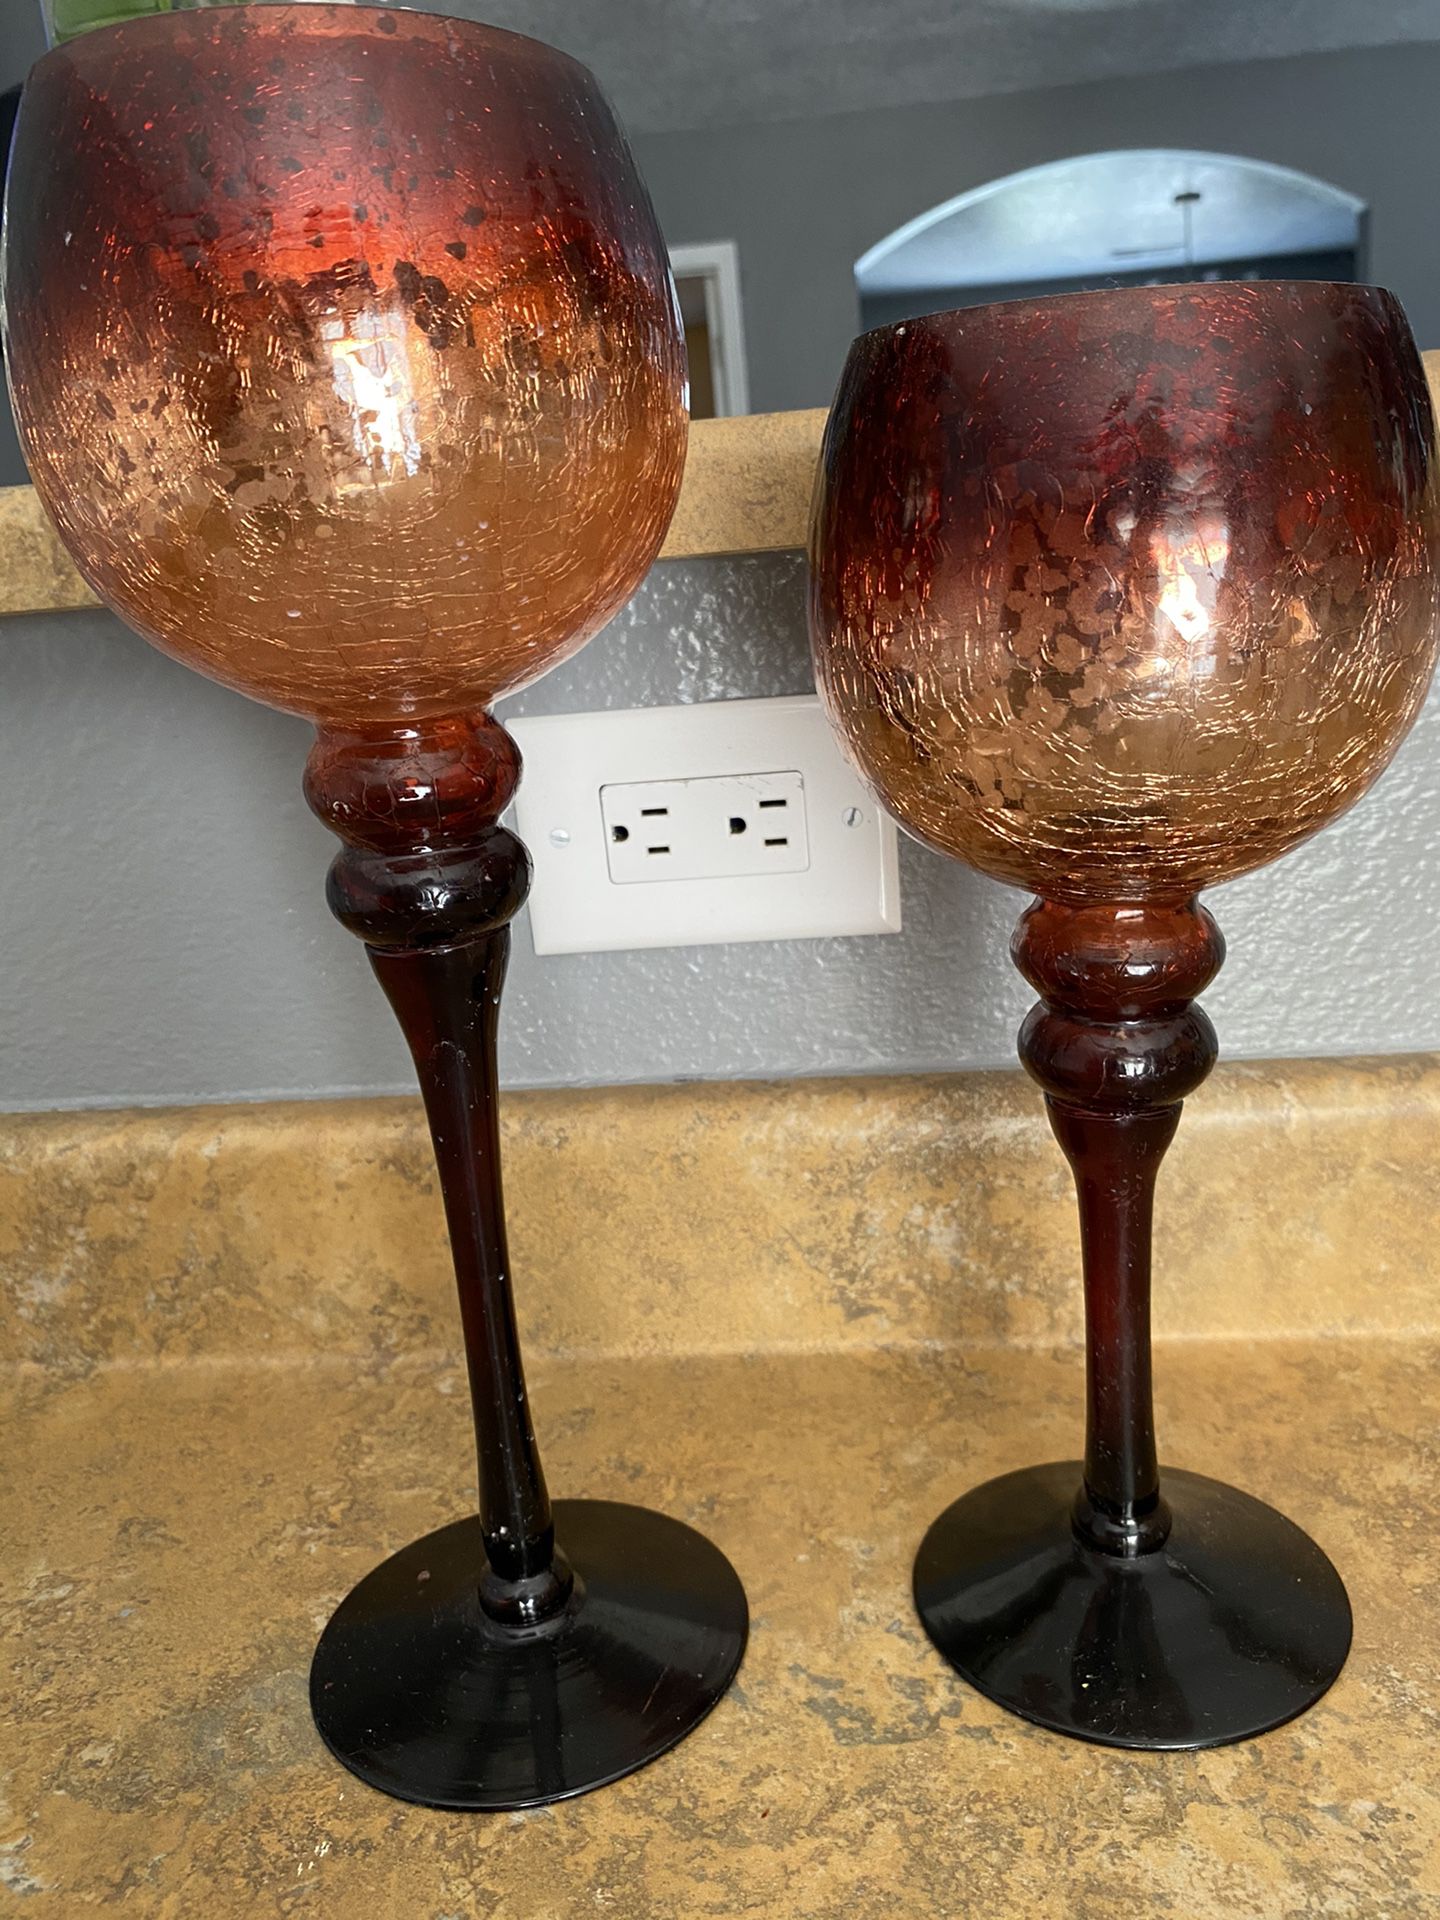 Large glass candle holders